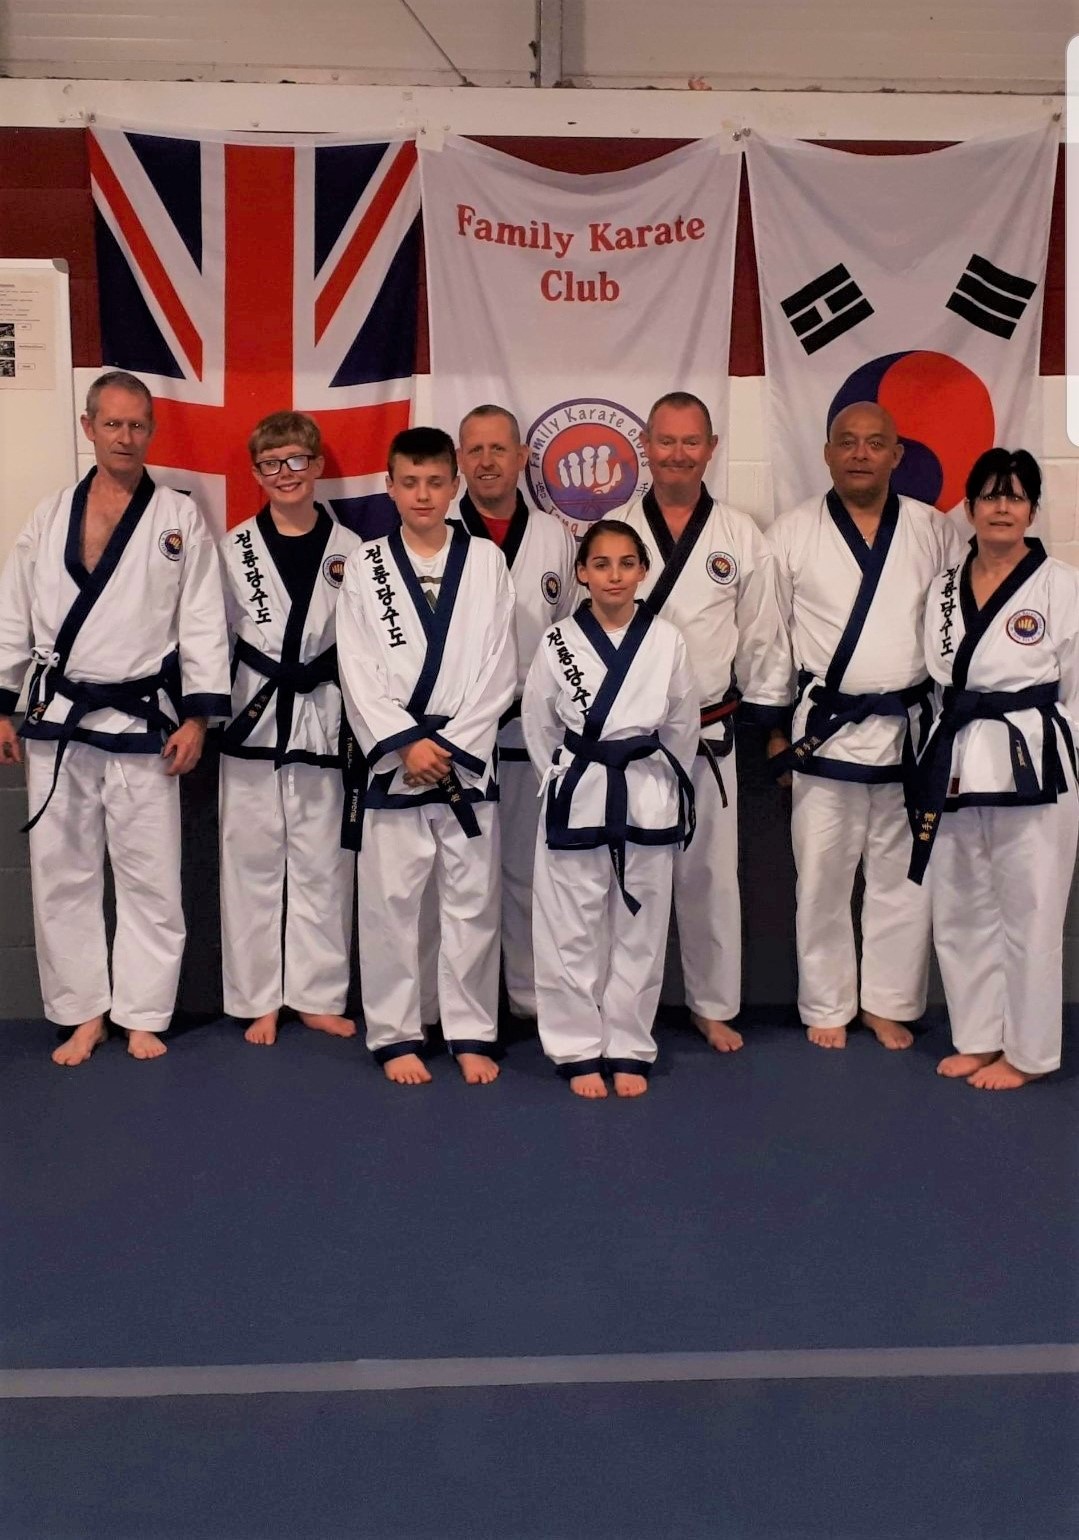 Group Photo - Family Karate Clubs